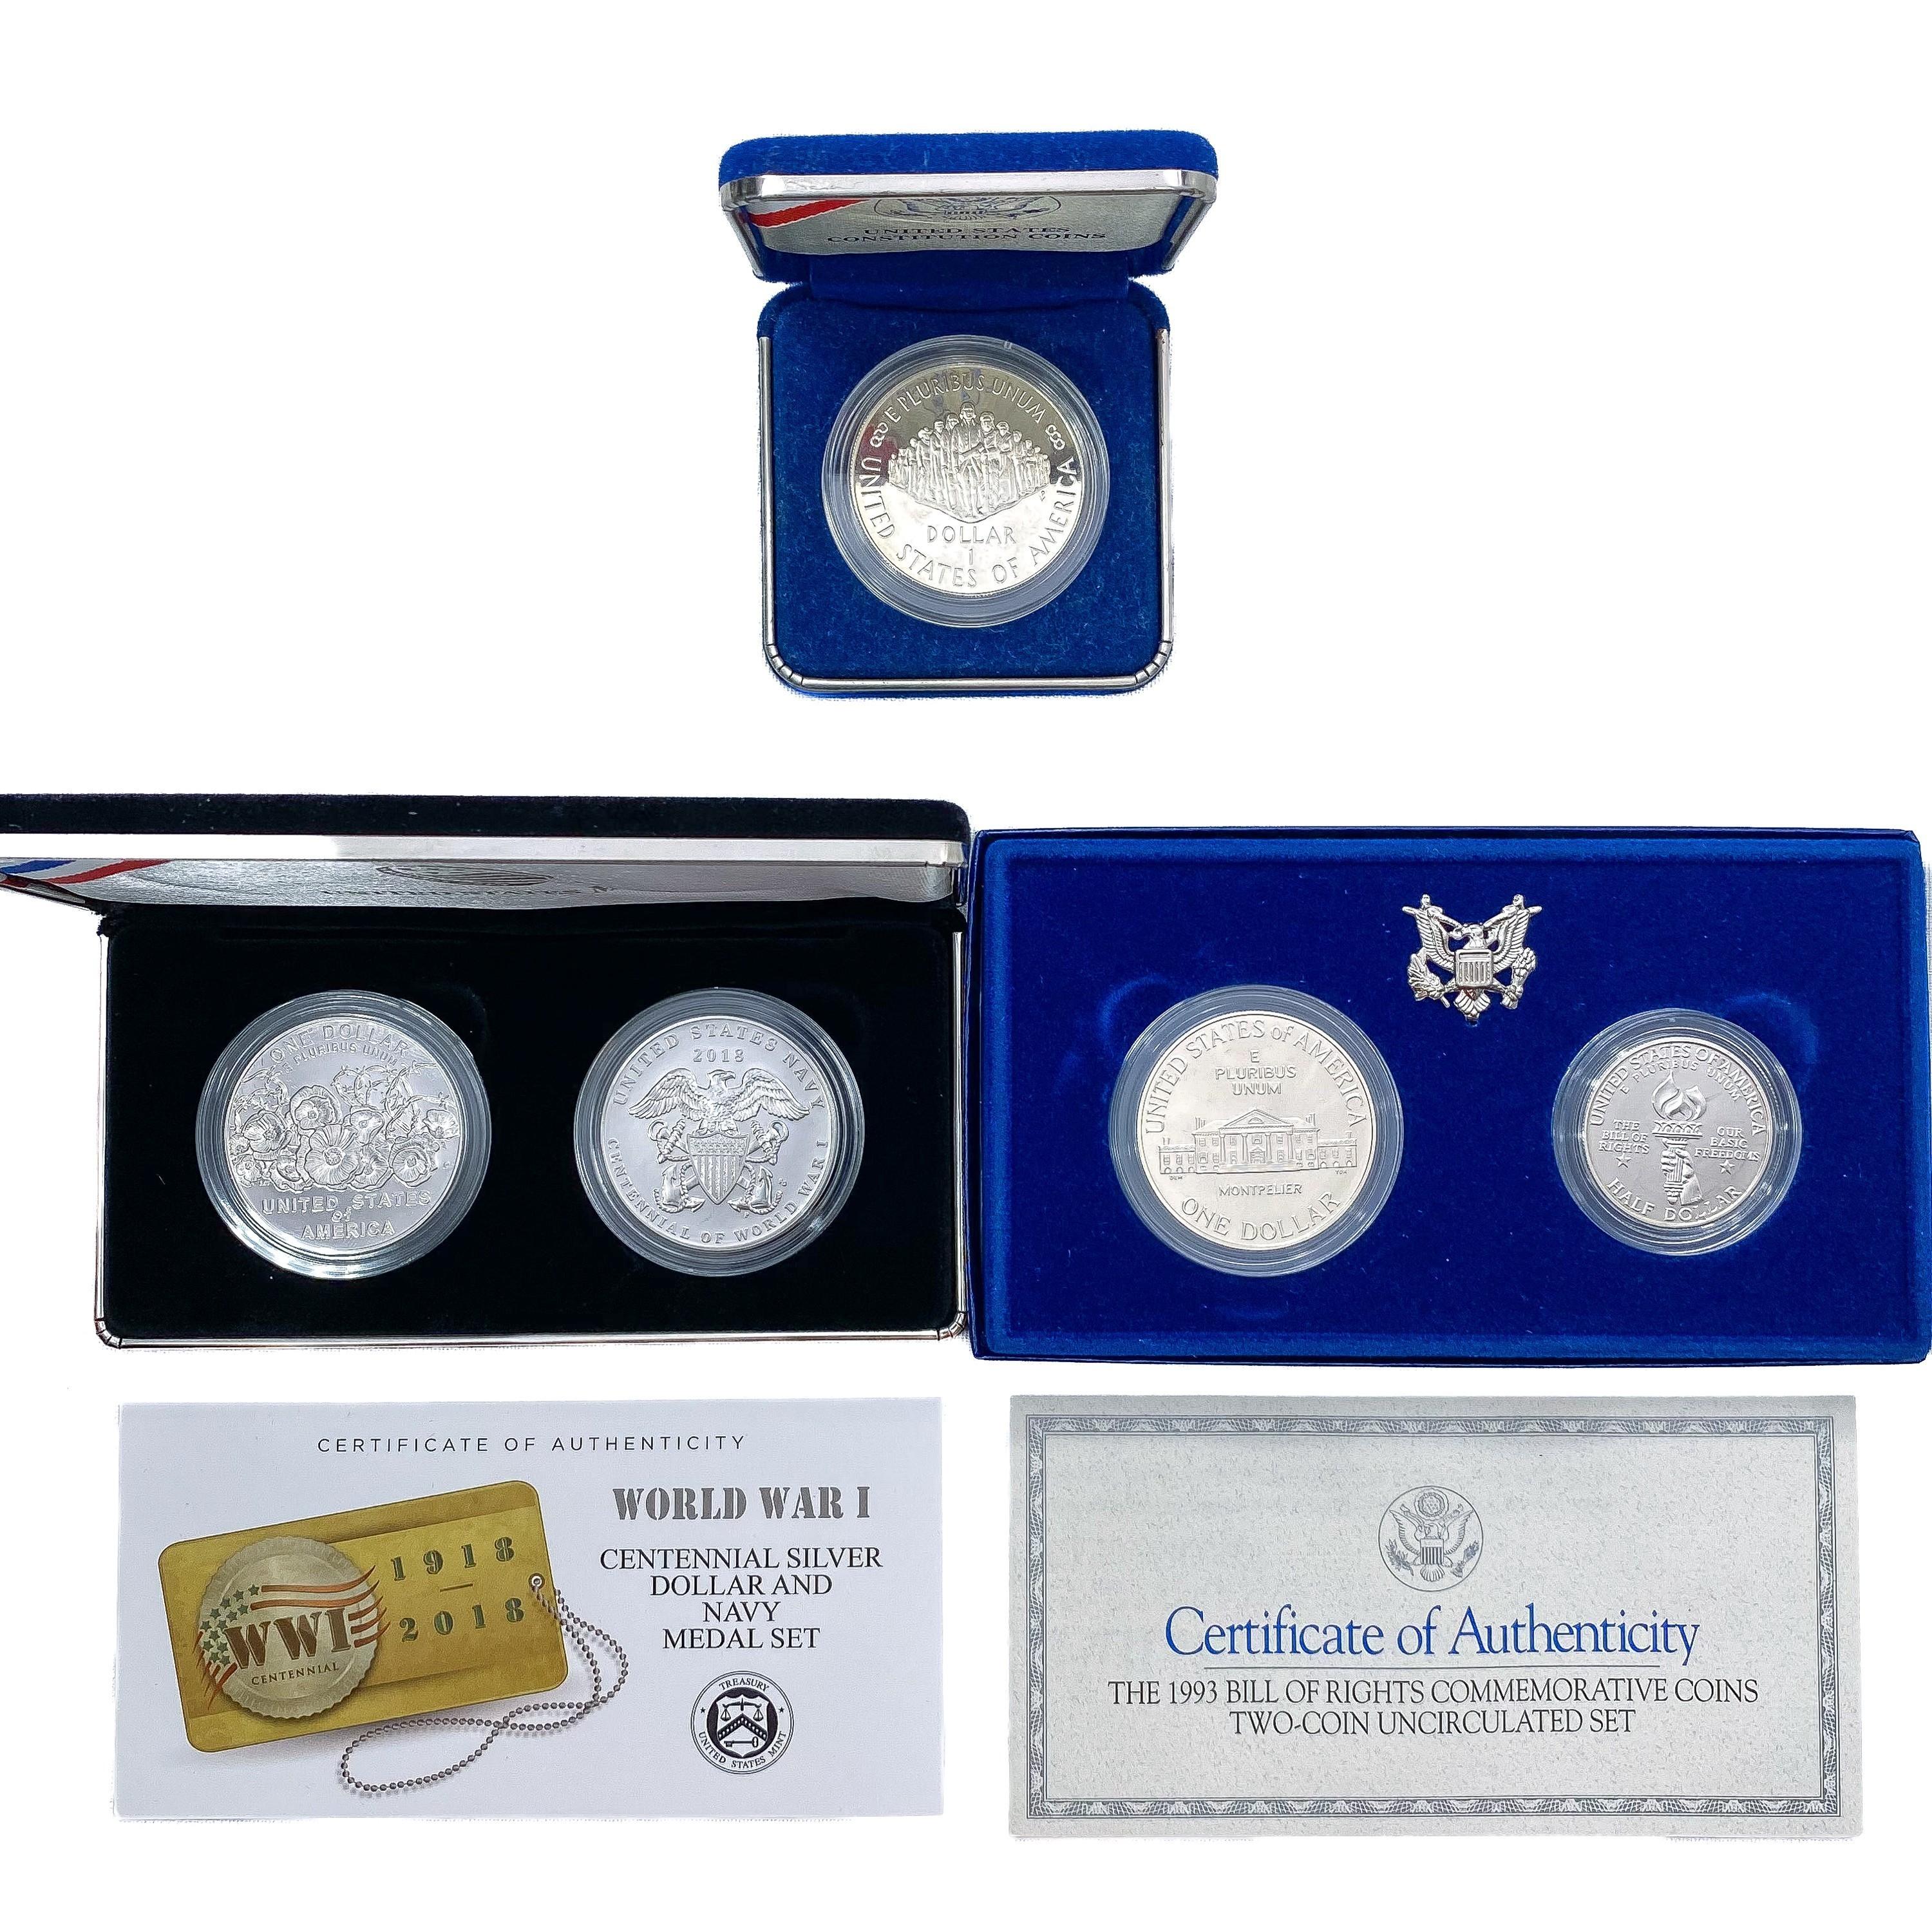 1987-2018 US Comm. Silver Dollars [5 Coins]